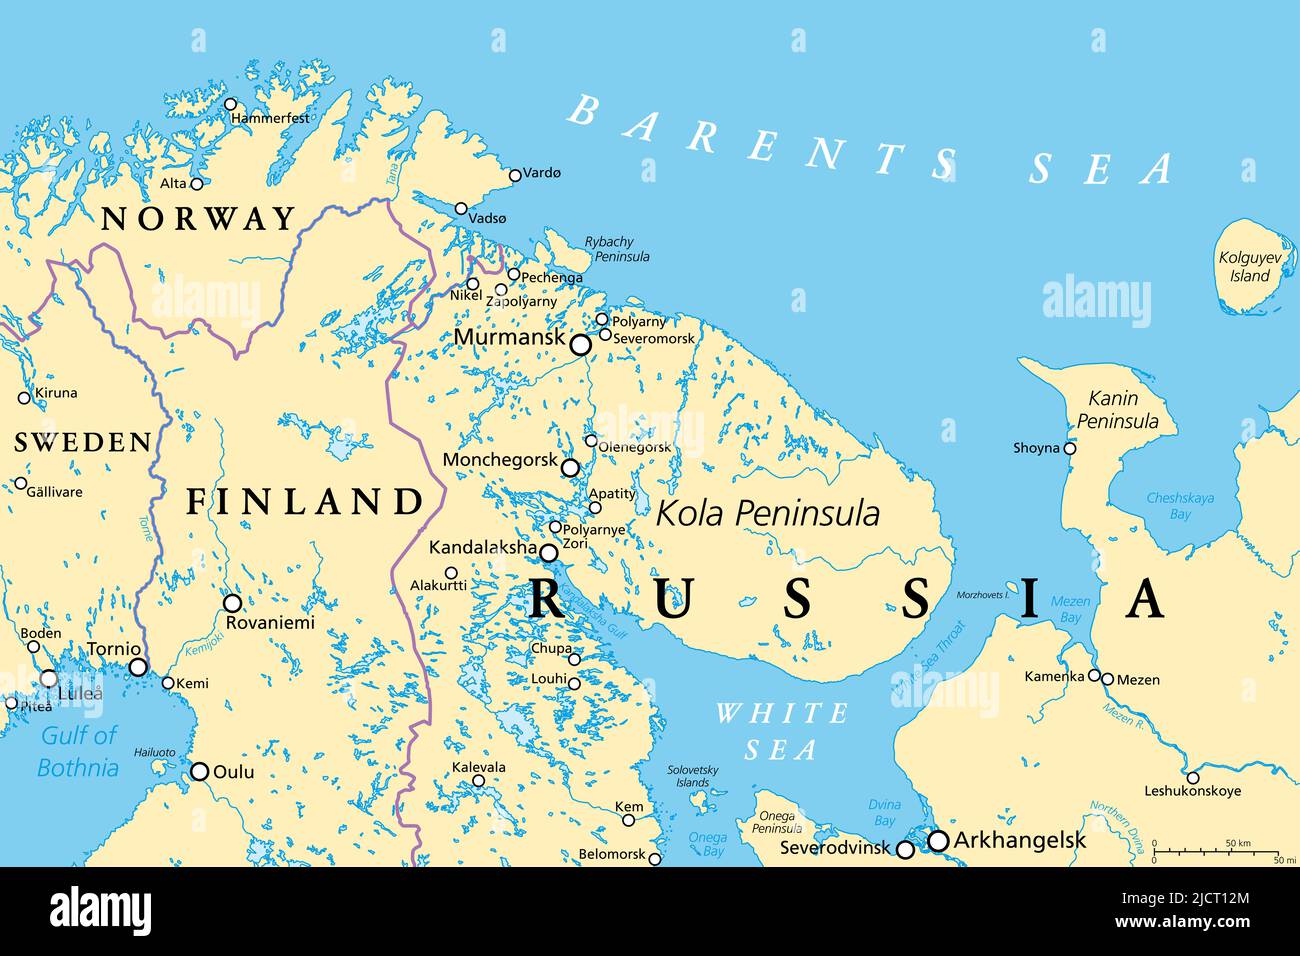 Murmansk Oblast and Kola Peninsula, political map. Federal subject of Russia, part of Lapland region, bordering Norway and Finland. Stock Photo